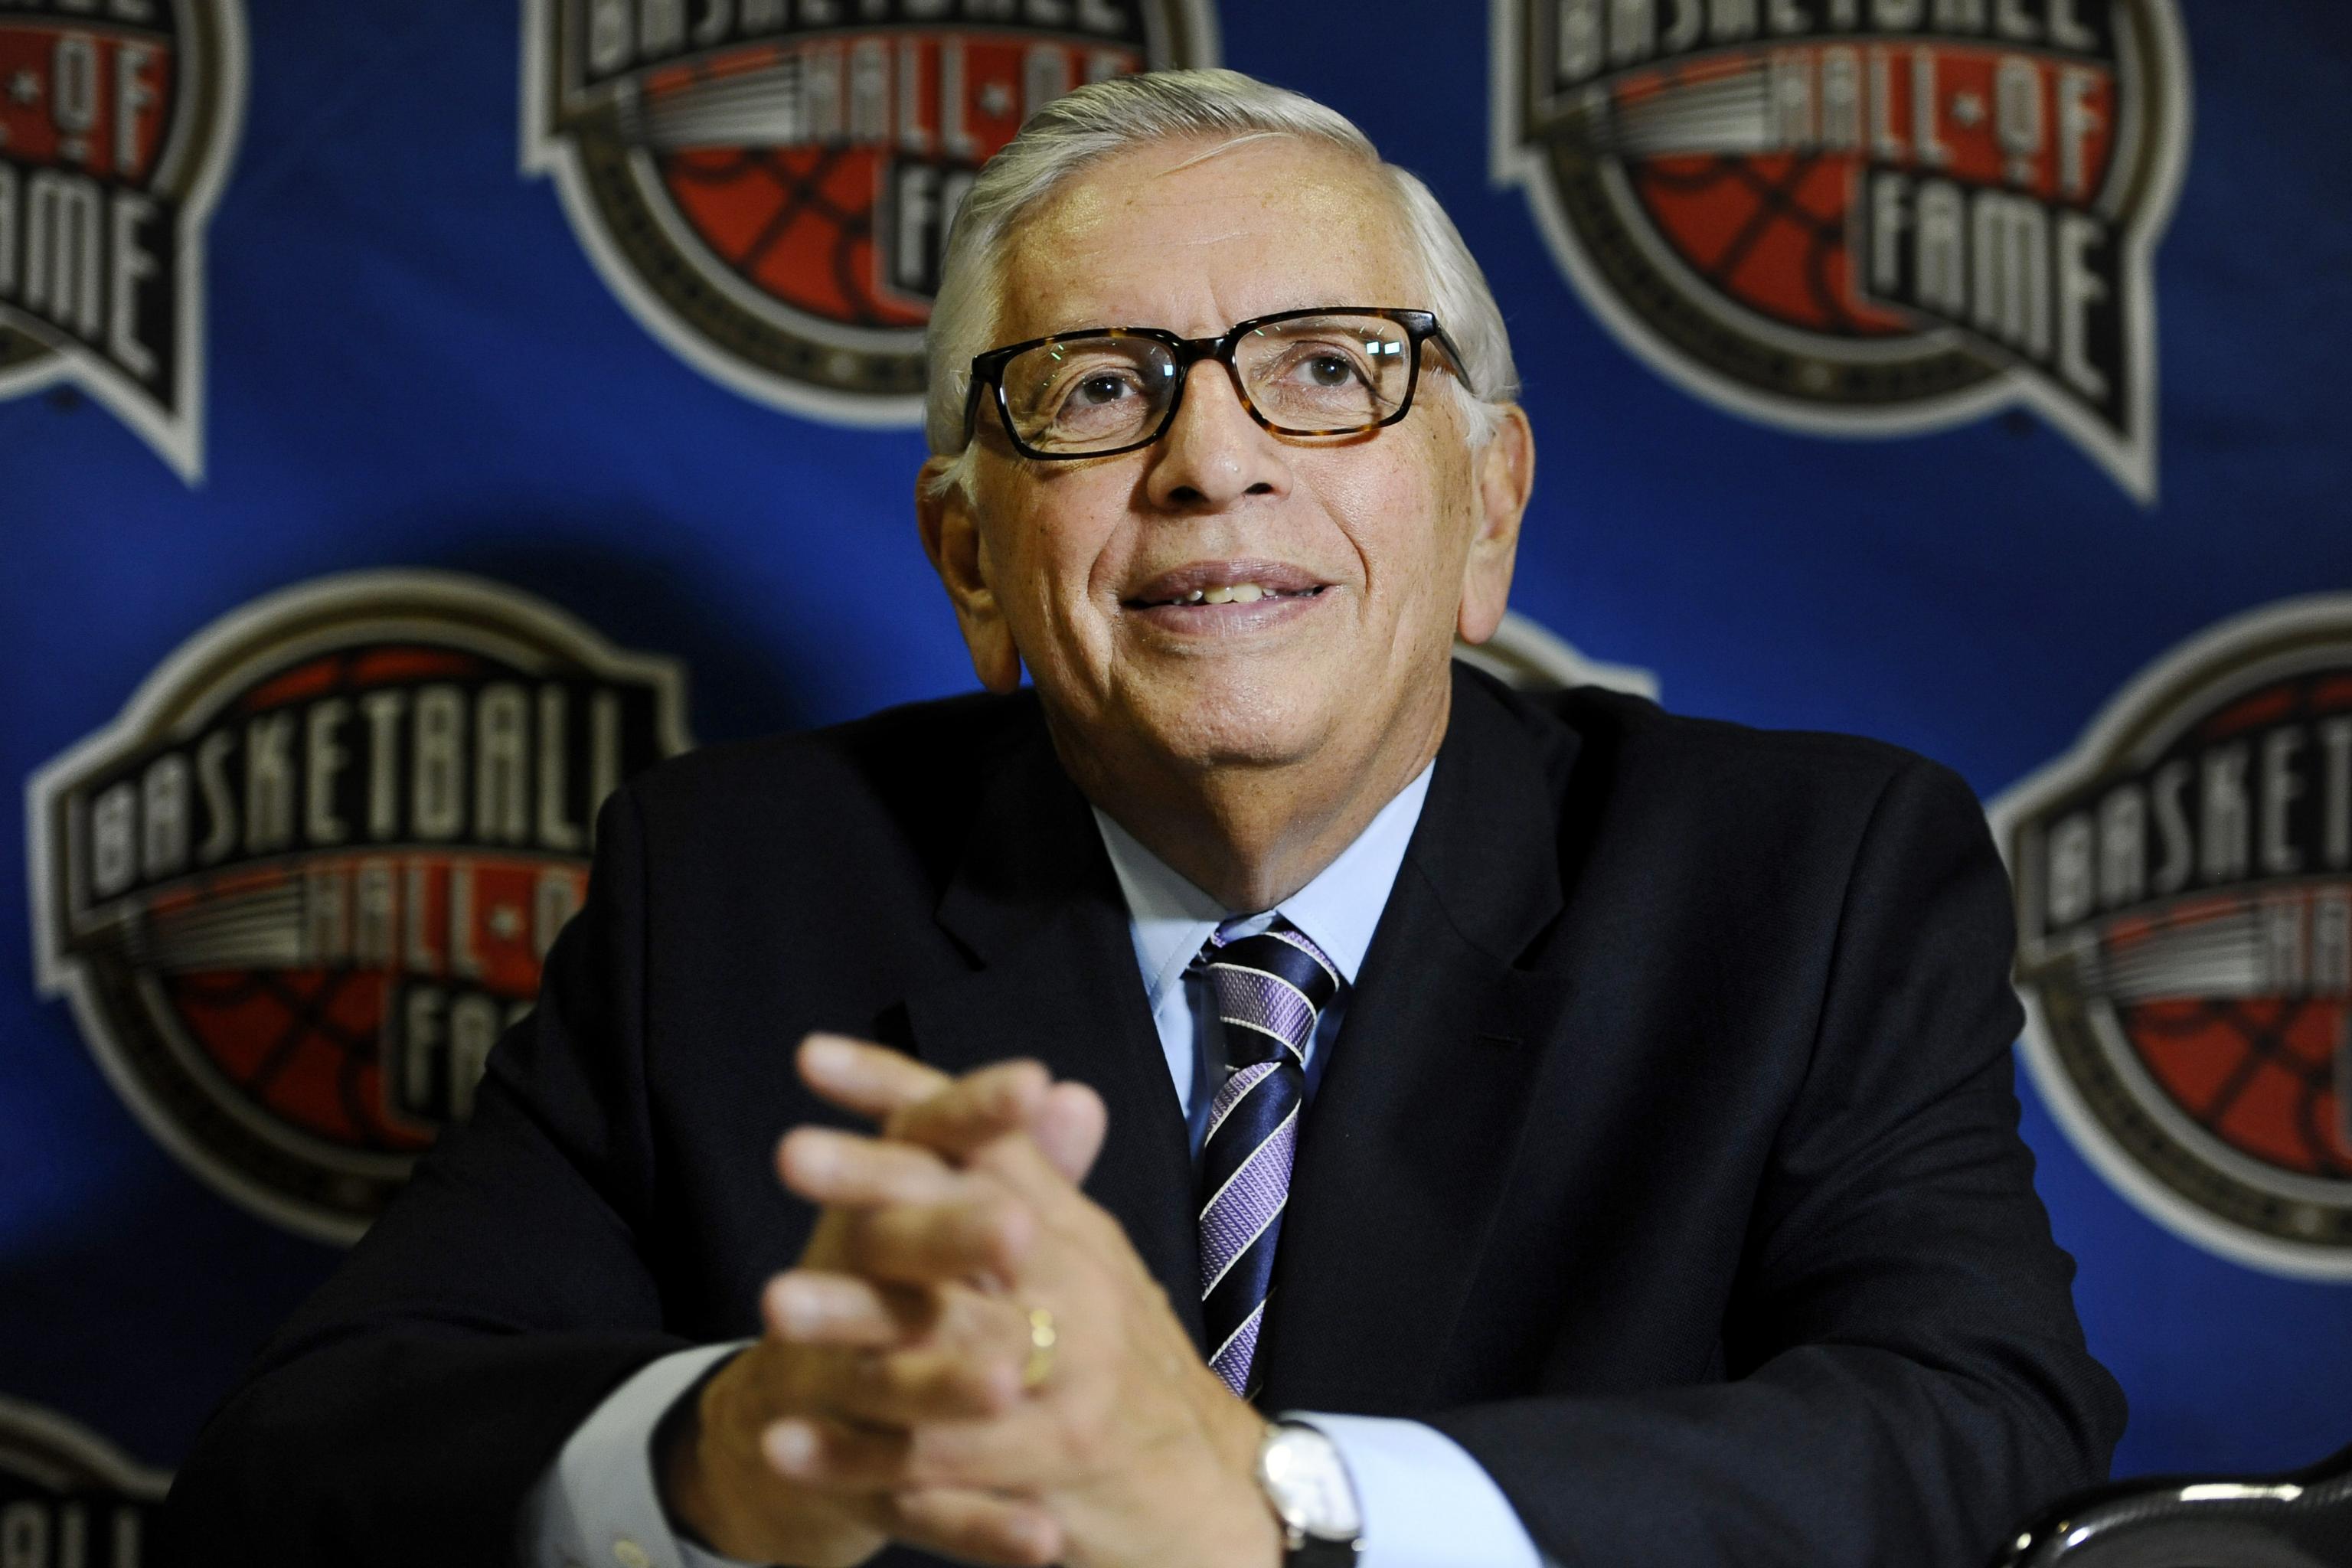 Without David Stern, There Wouldn't Be A WNBA